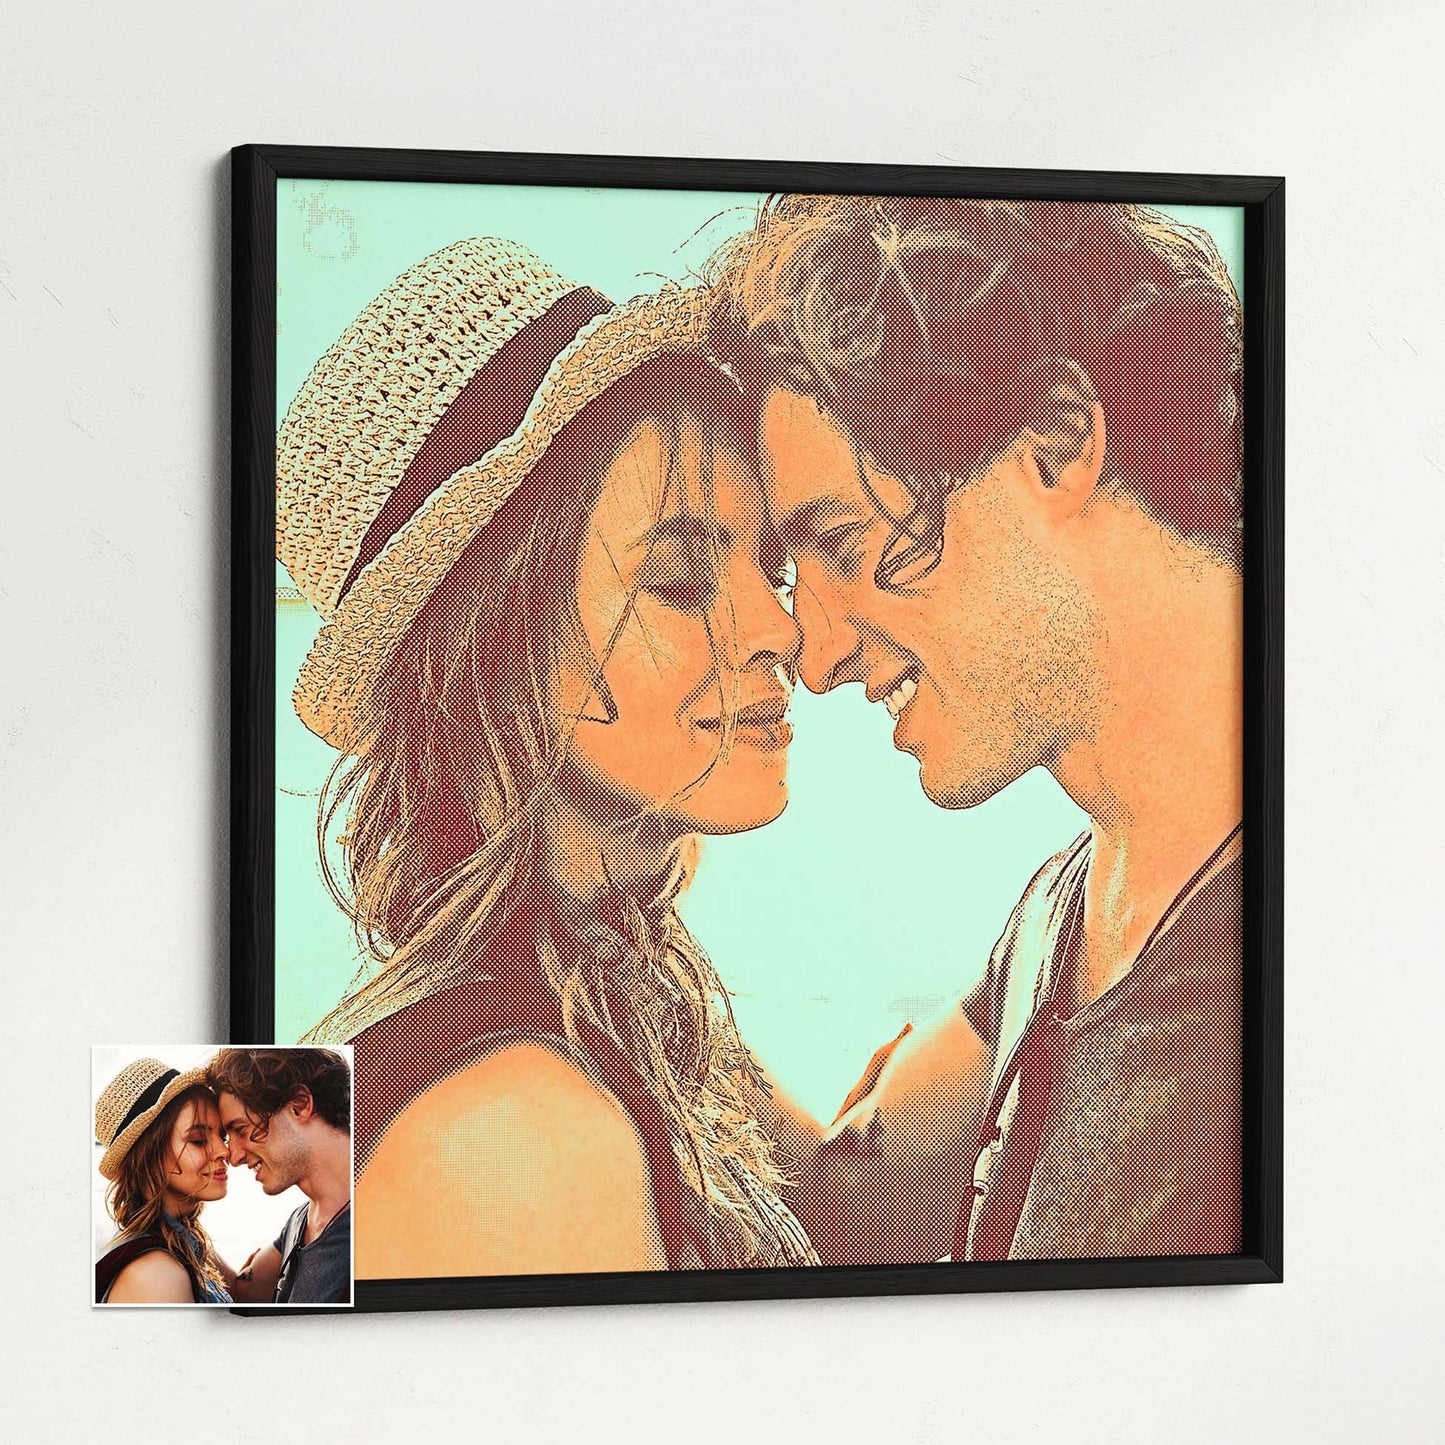 Capture the essence of your cherished moments with a Personalised Crosshatch Drawing Framed Print. This artwork combines the joy of vibrant colors with the intricate crosshatch texture, creating a visually stunning and fun print 